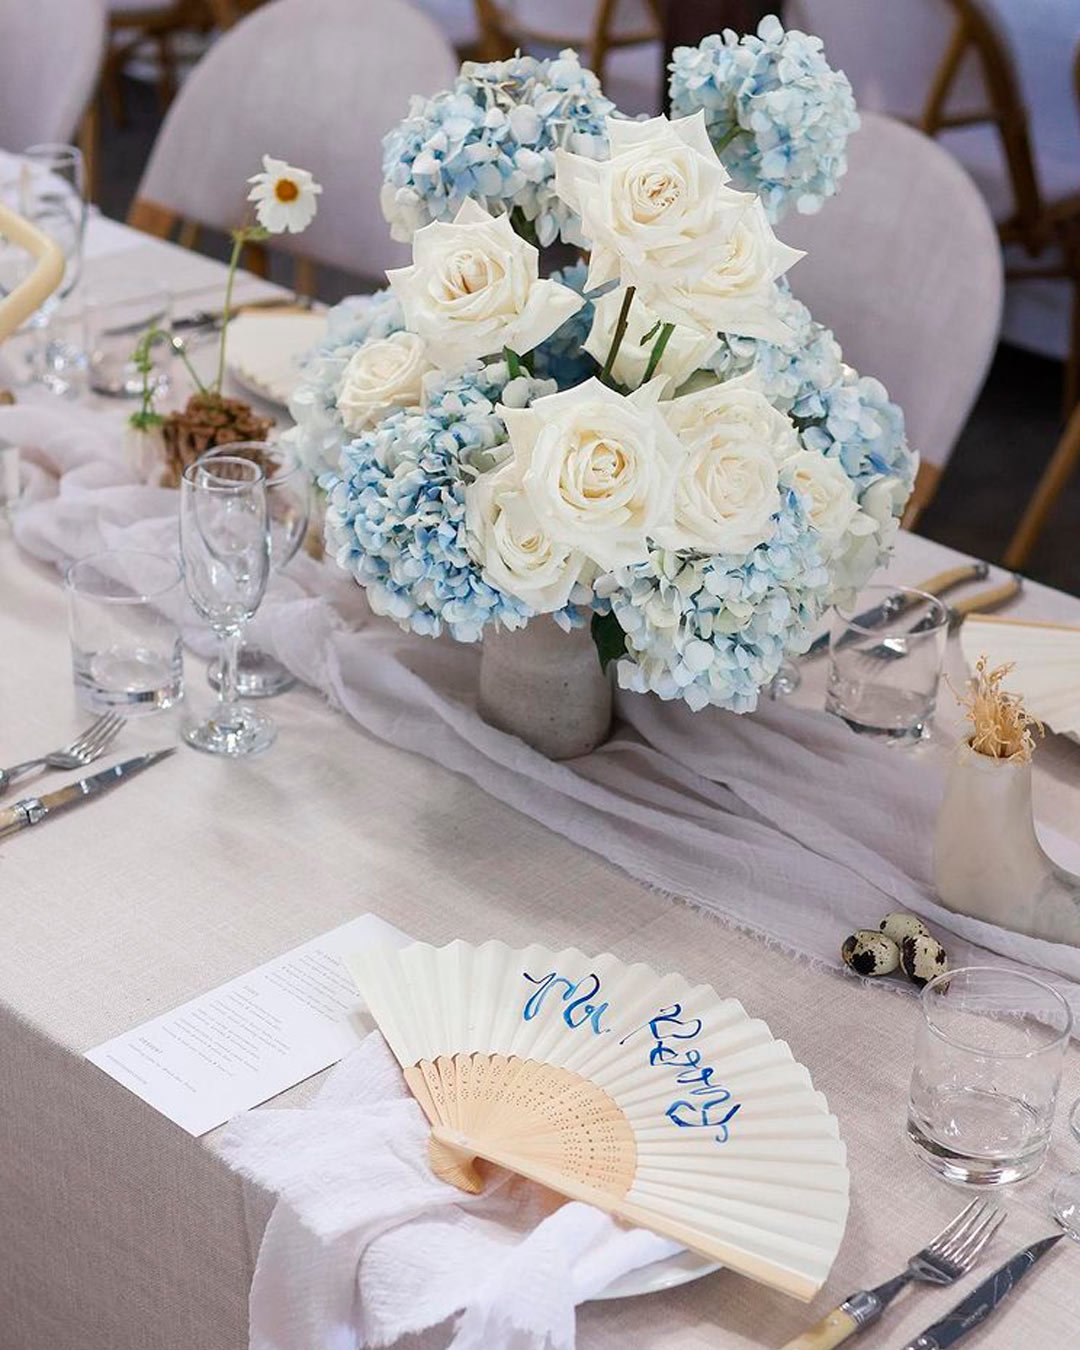 blue and white wedding colors flowers centerpiece table setting